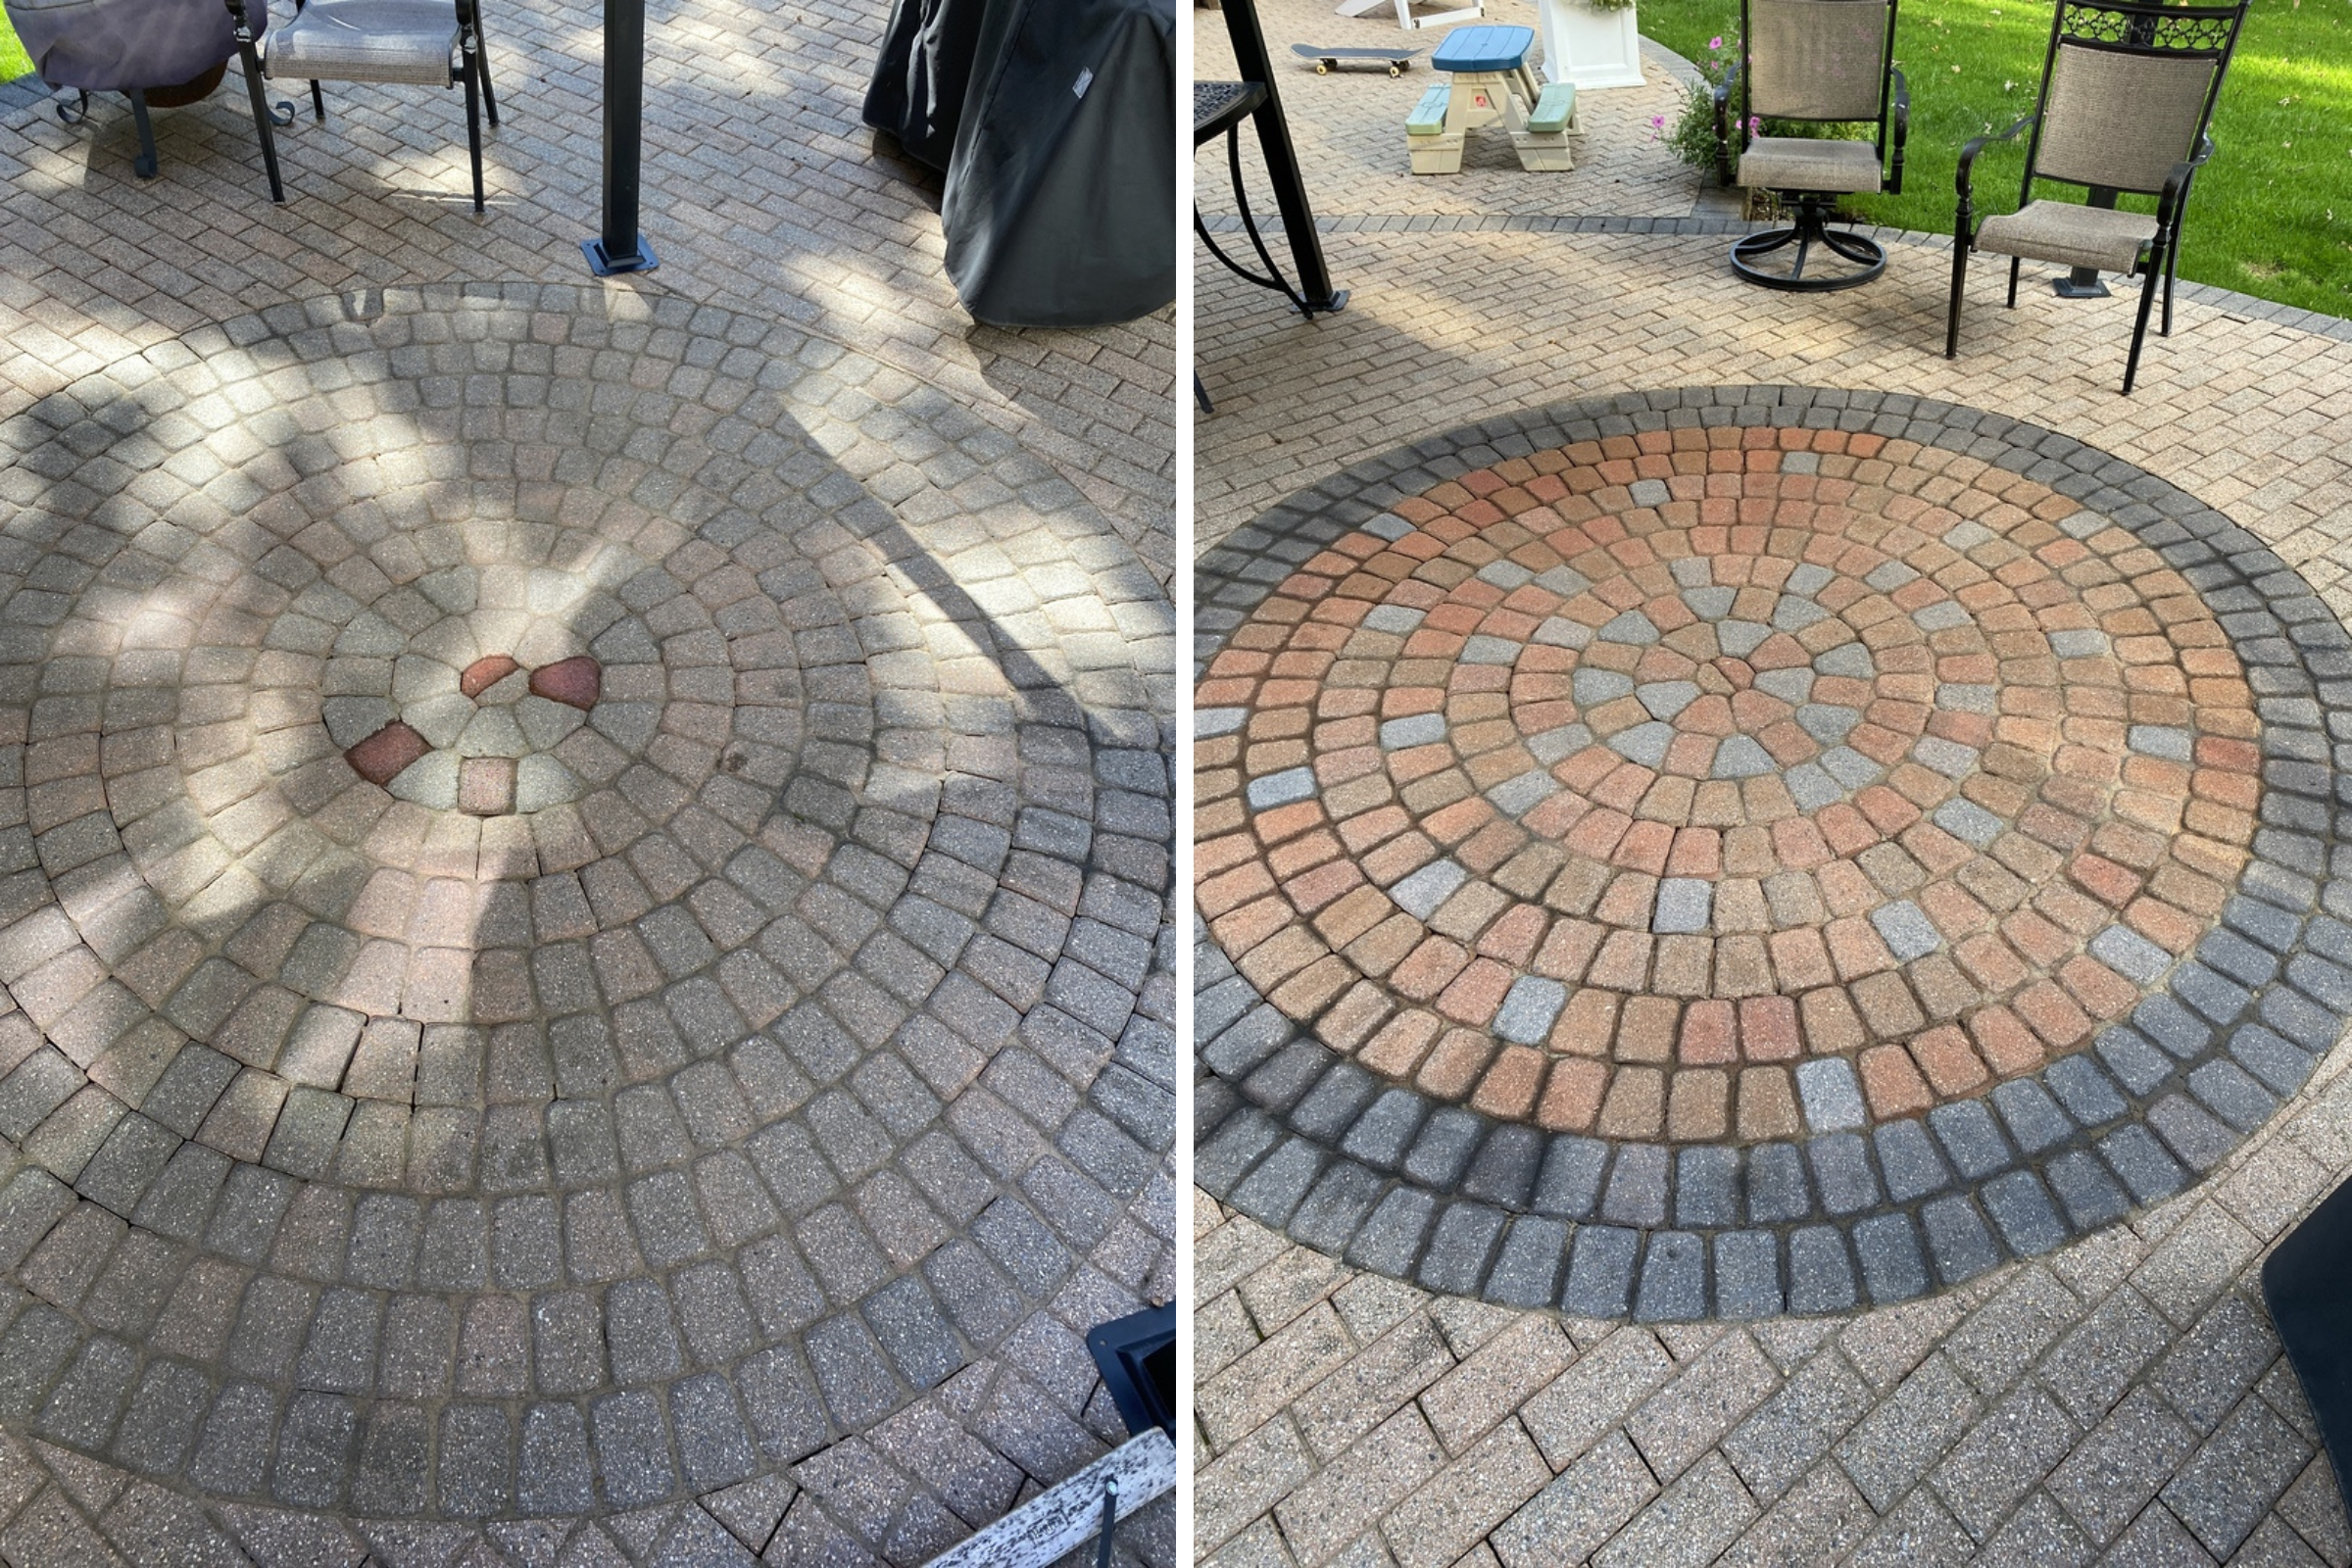 before and after photos of a circular paver design on a patio. The left photo shows the design with faded colors before restoration. The right photo displays the same design with colors restored to vibrant shades, with the outer ring in deep charcoal and the inner circles in a mix of terracotta, russet and silver gray